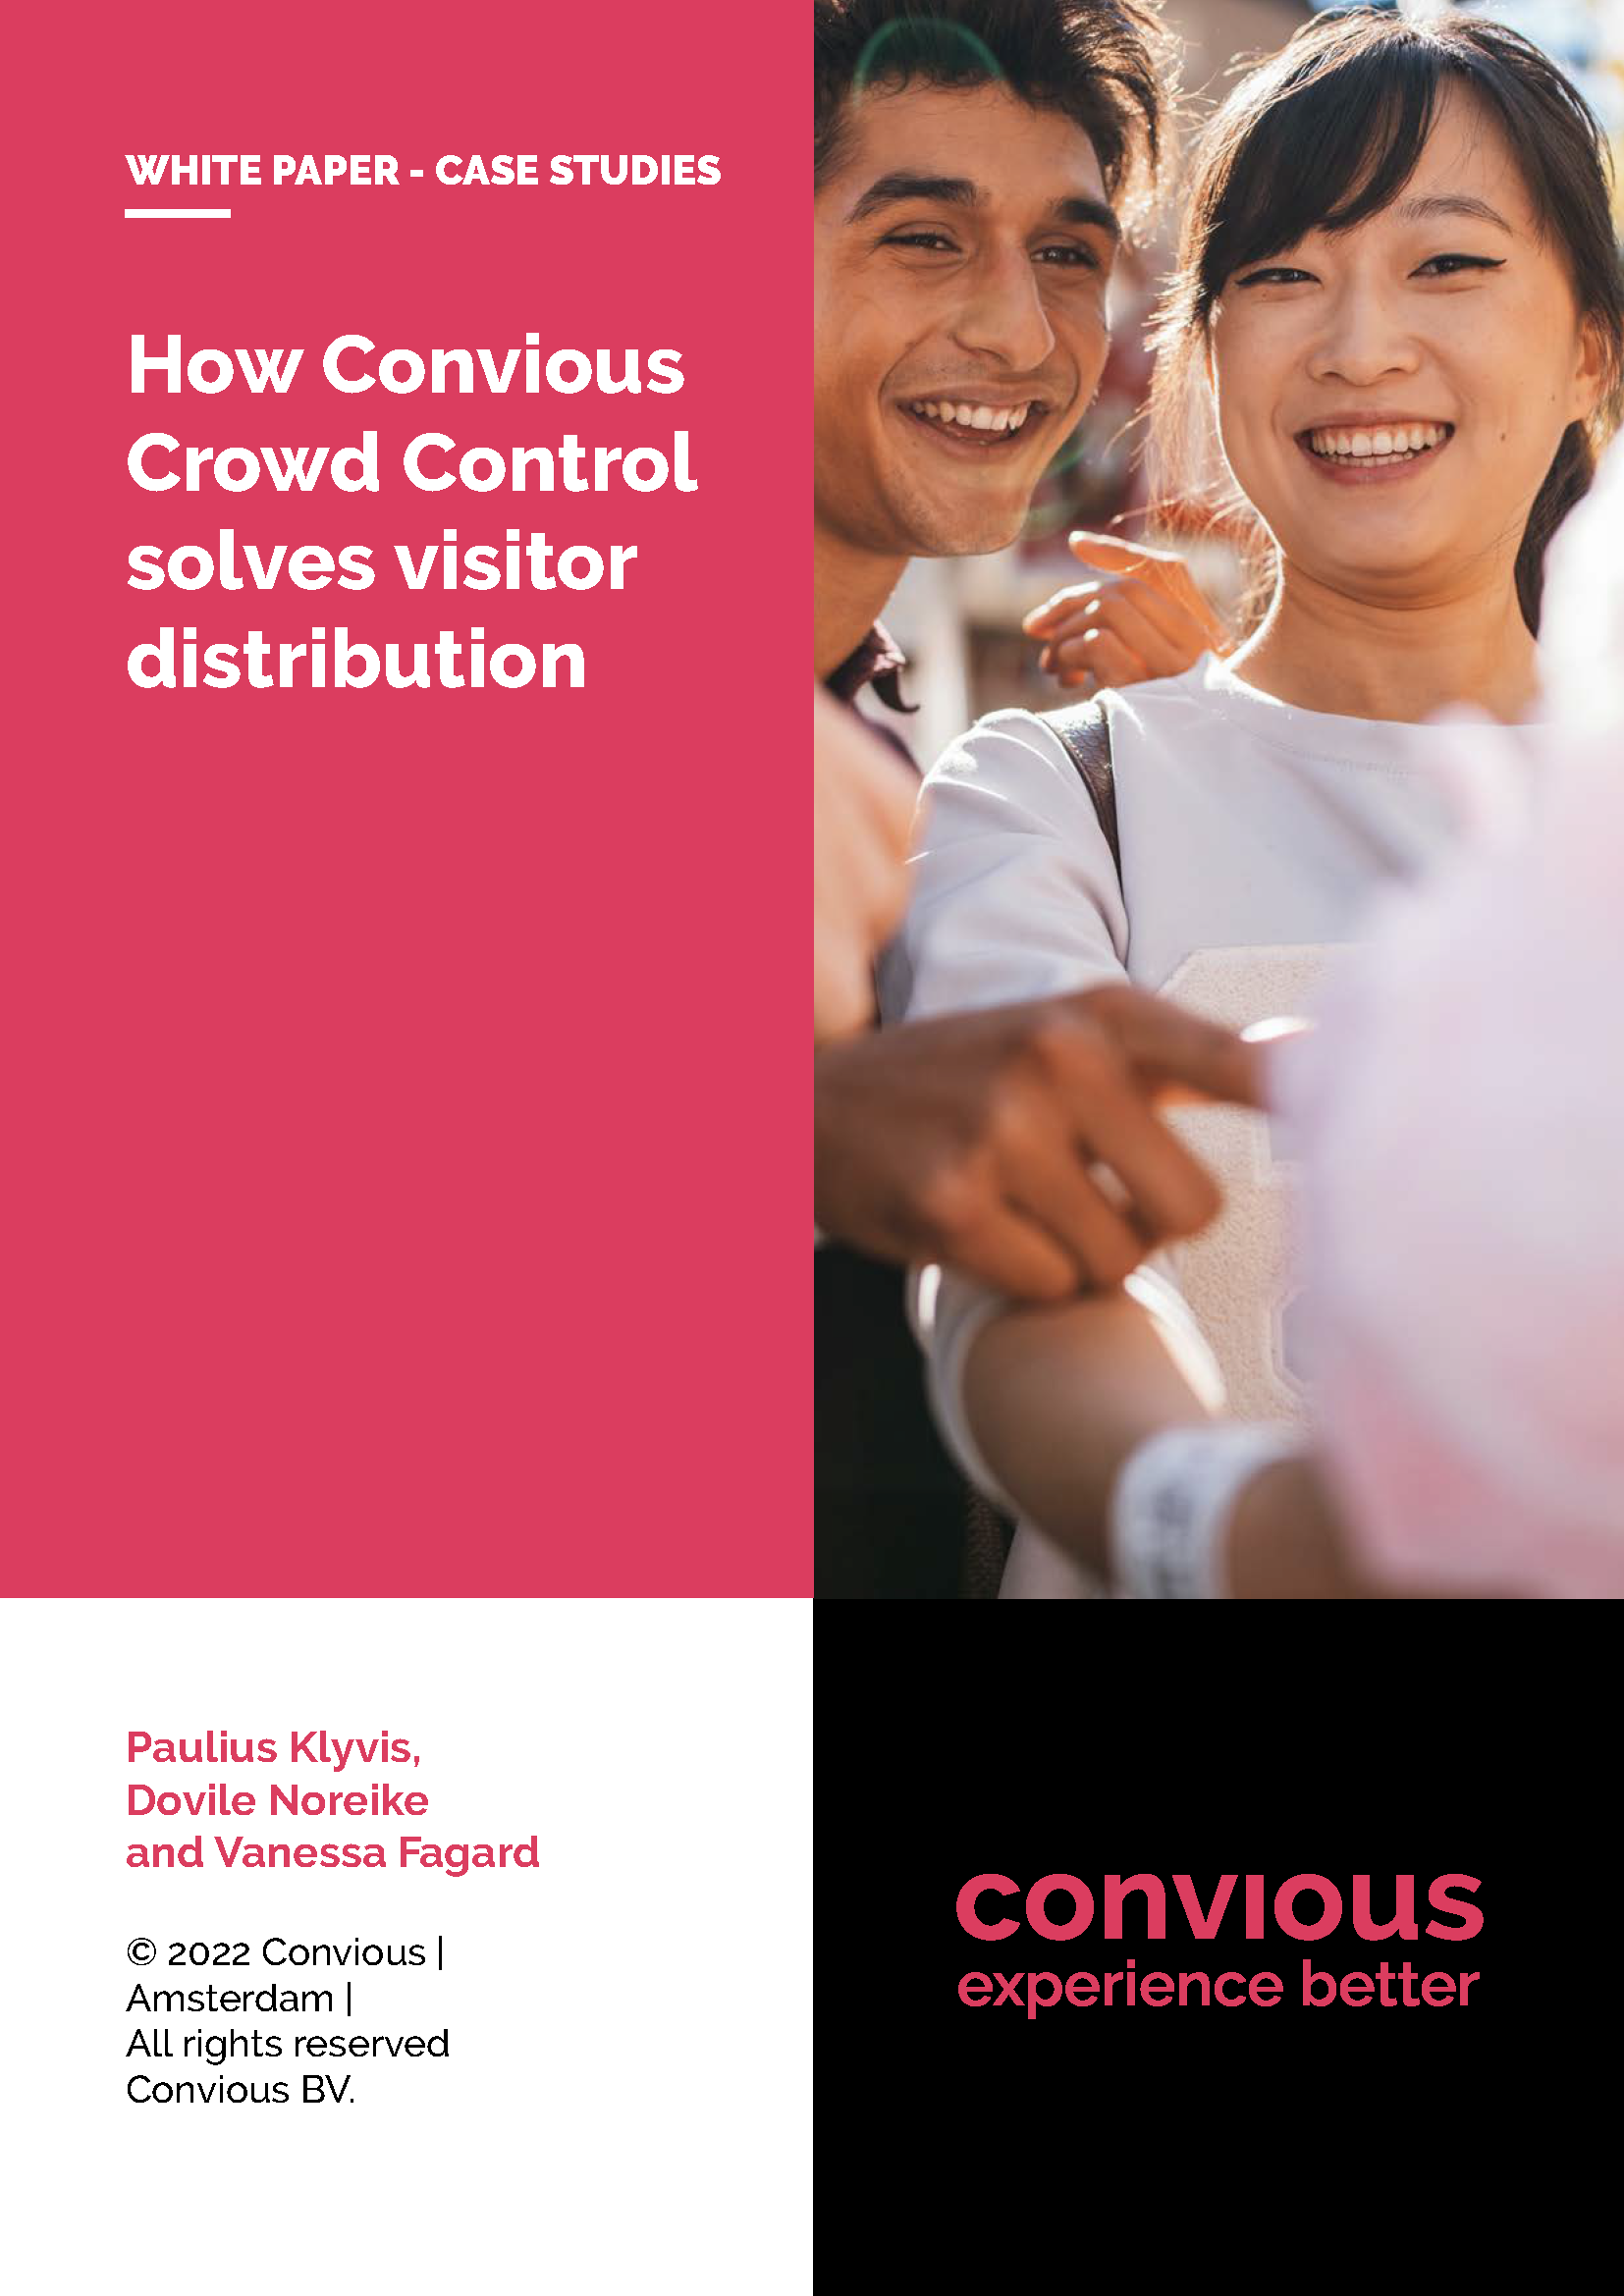 Cover - Convious-CrowdControl-WhitePaper-EN_Page_01